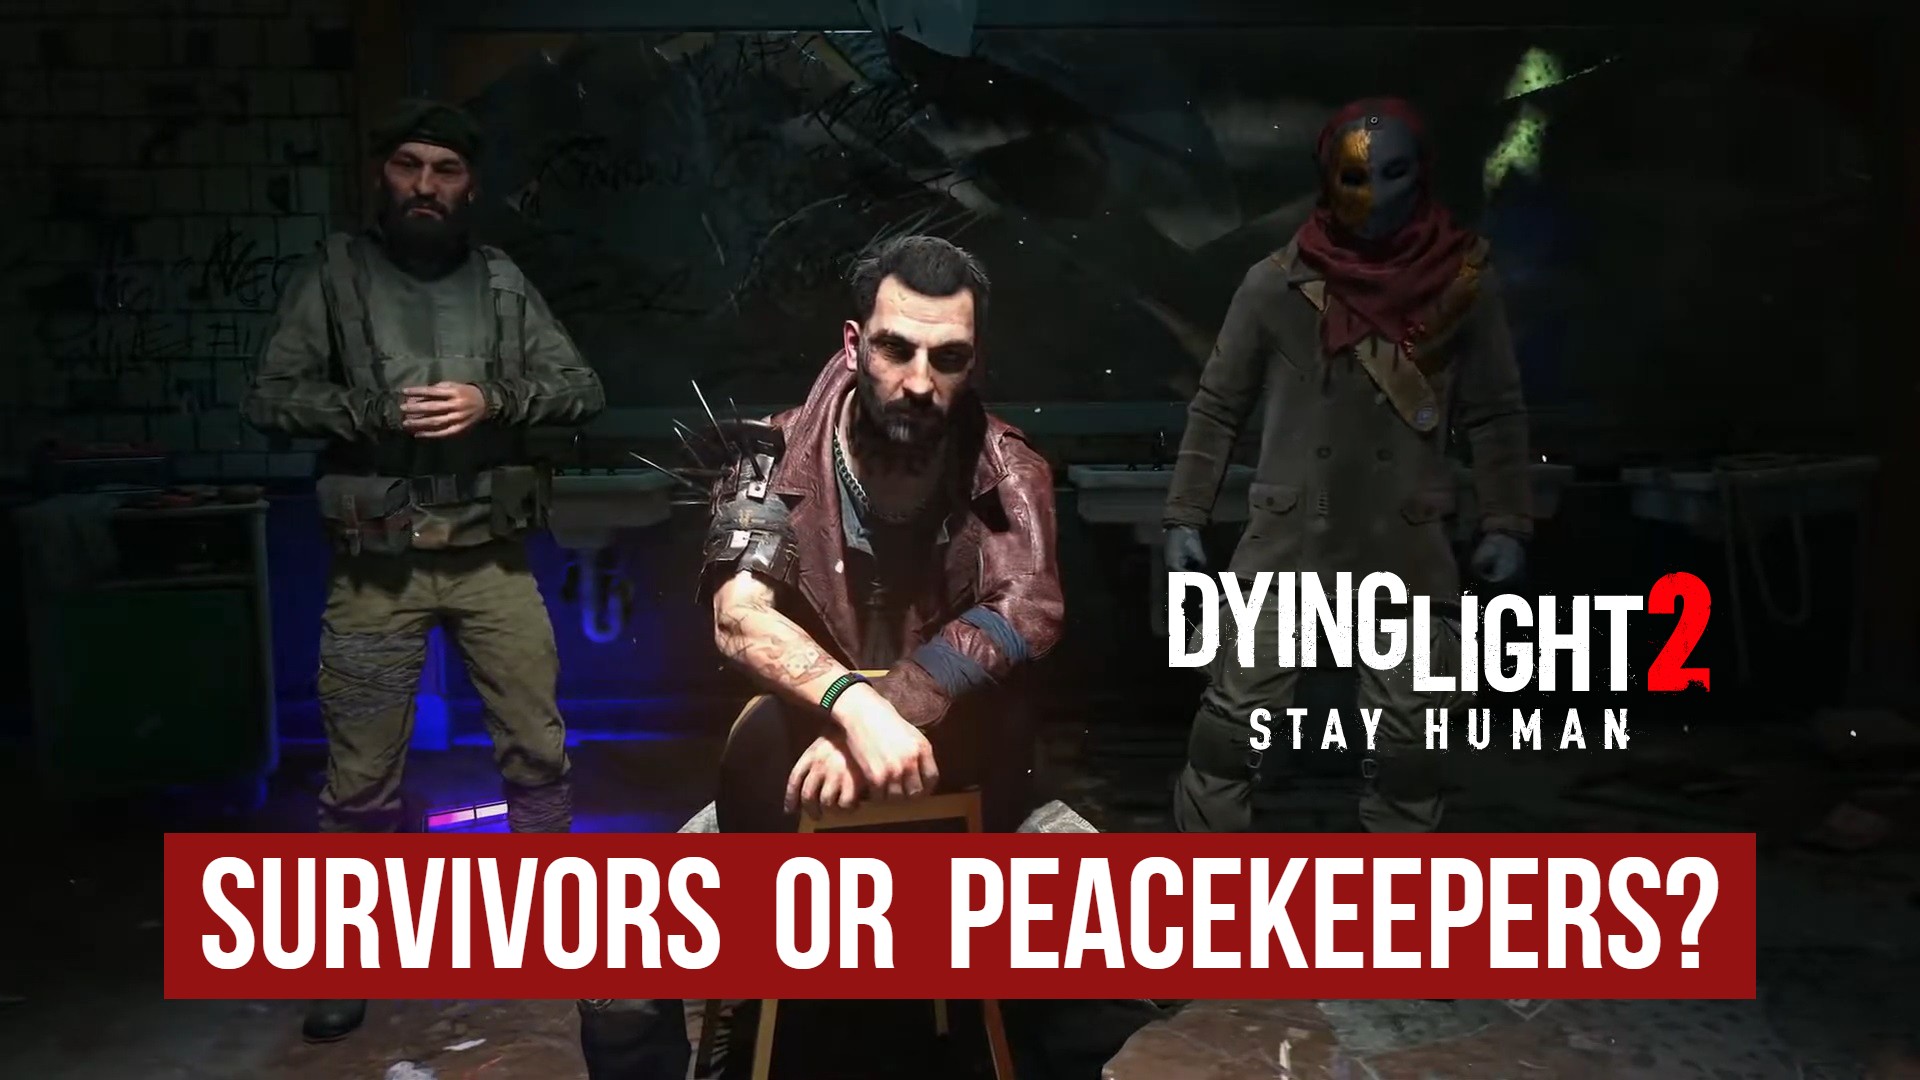 Dying Light 2: Faction Guide, Survivors or Peacekeepers?